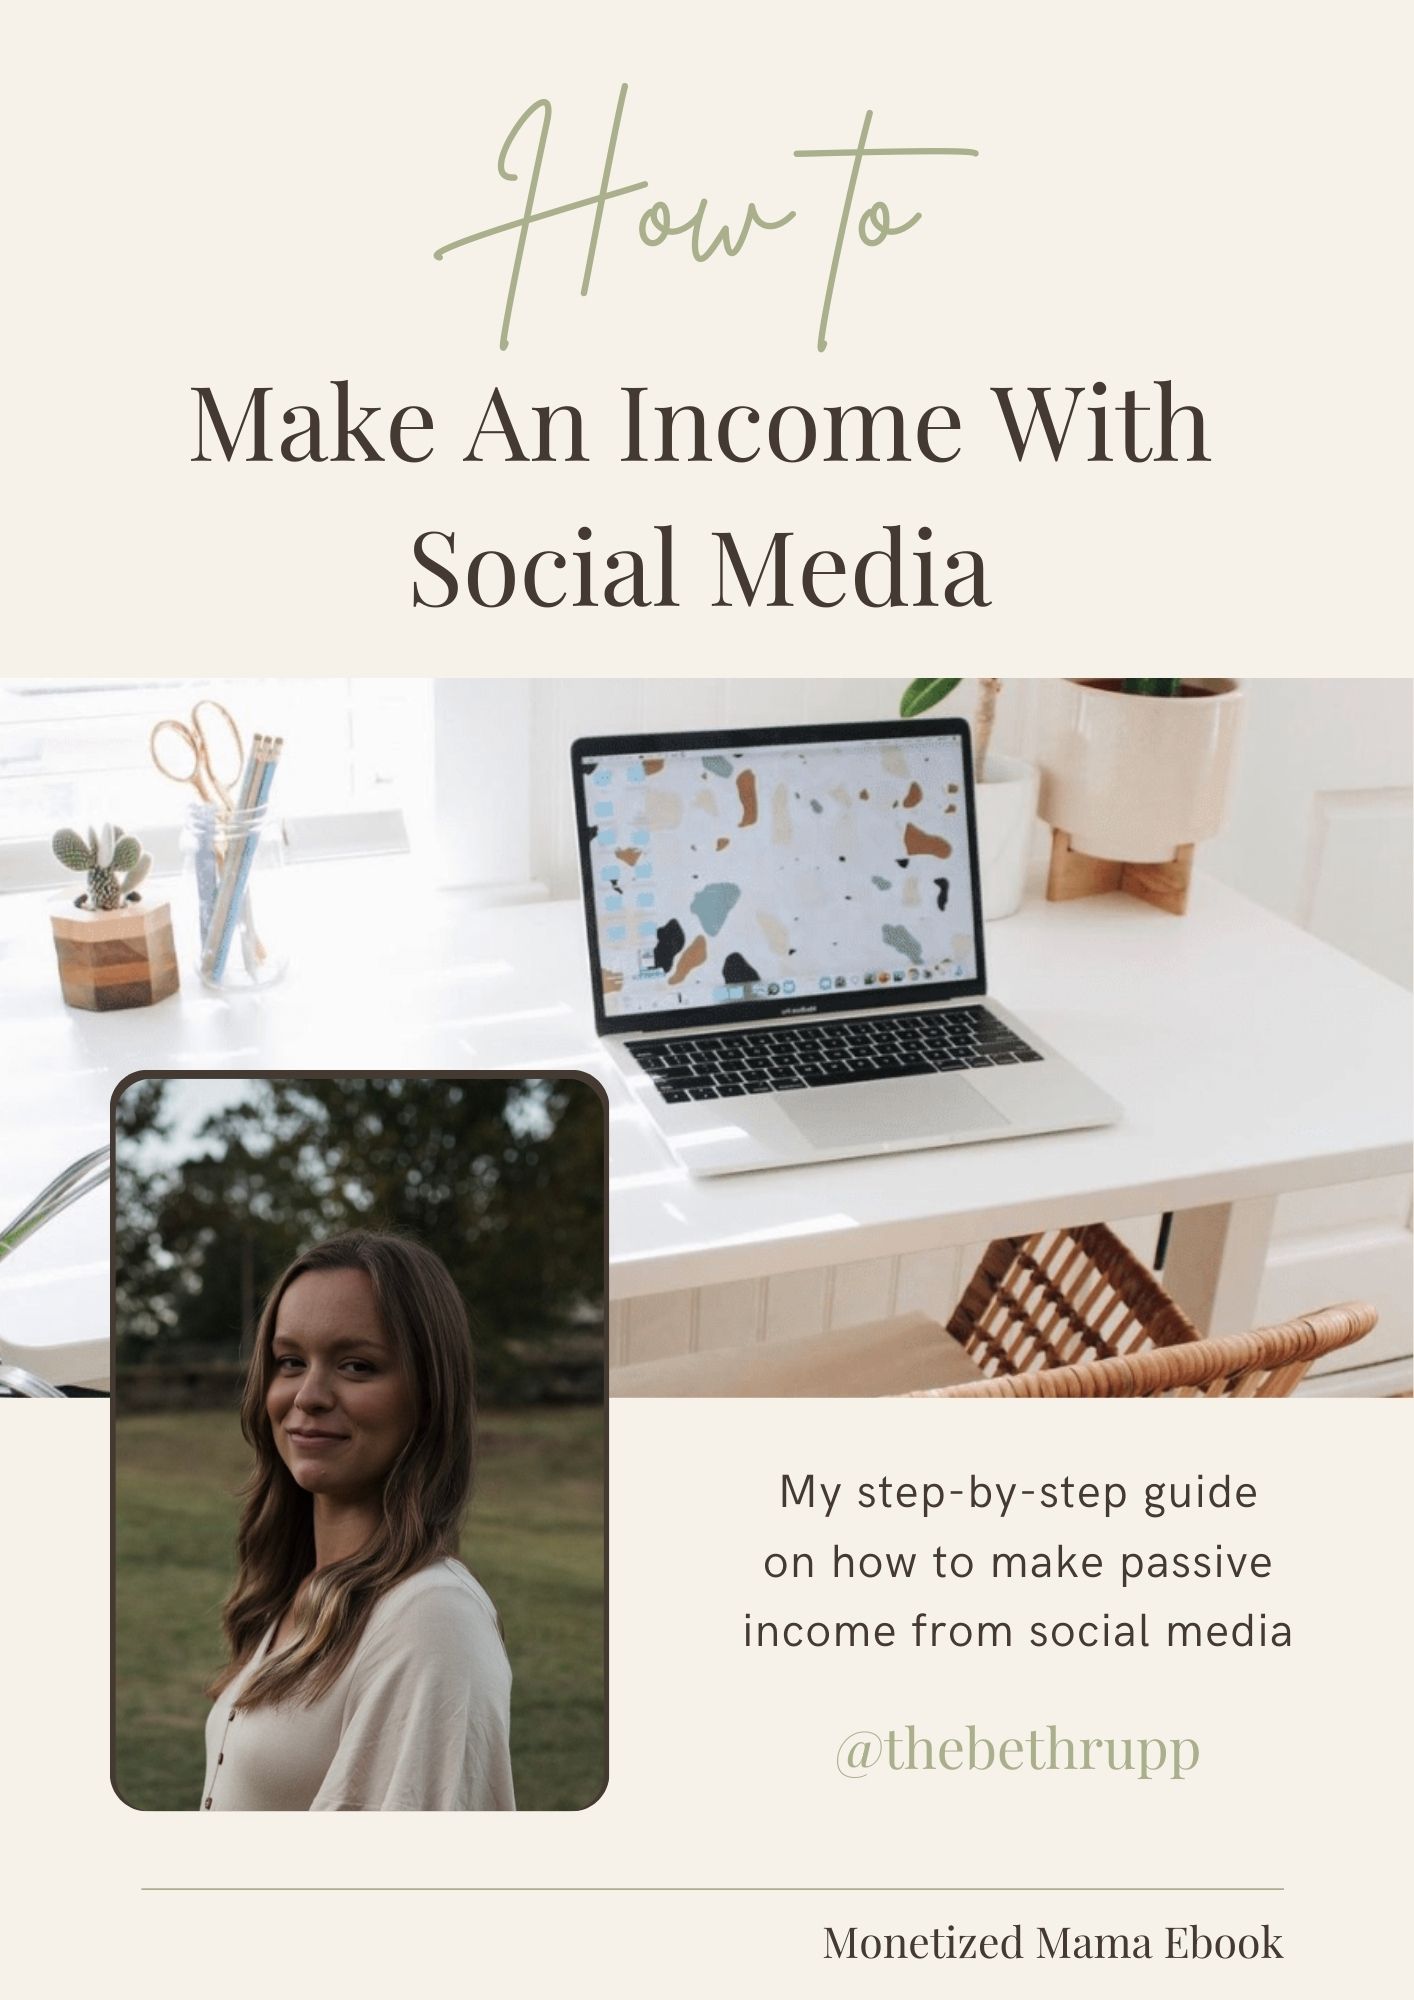 How To Make Money With Social Media